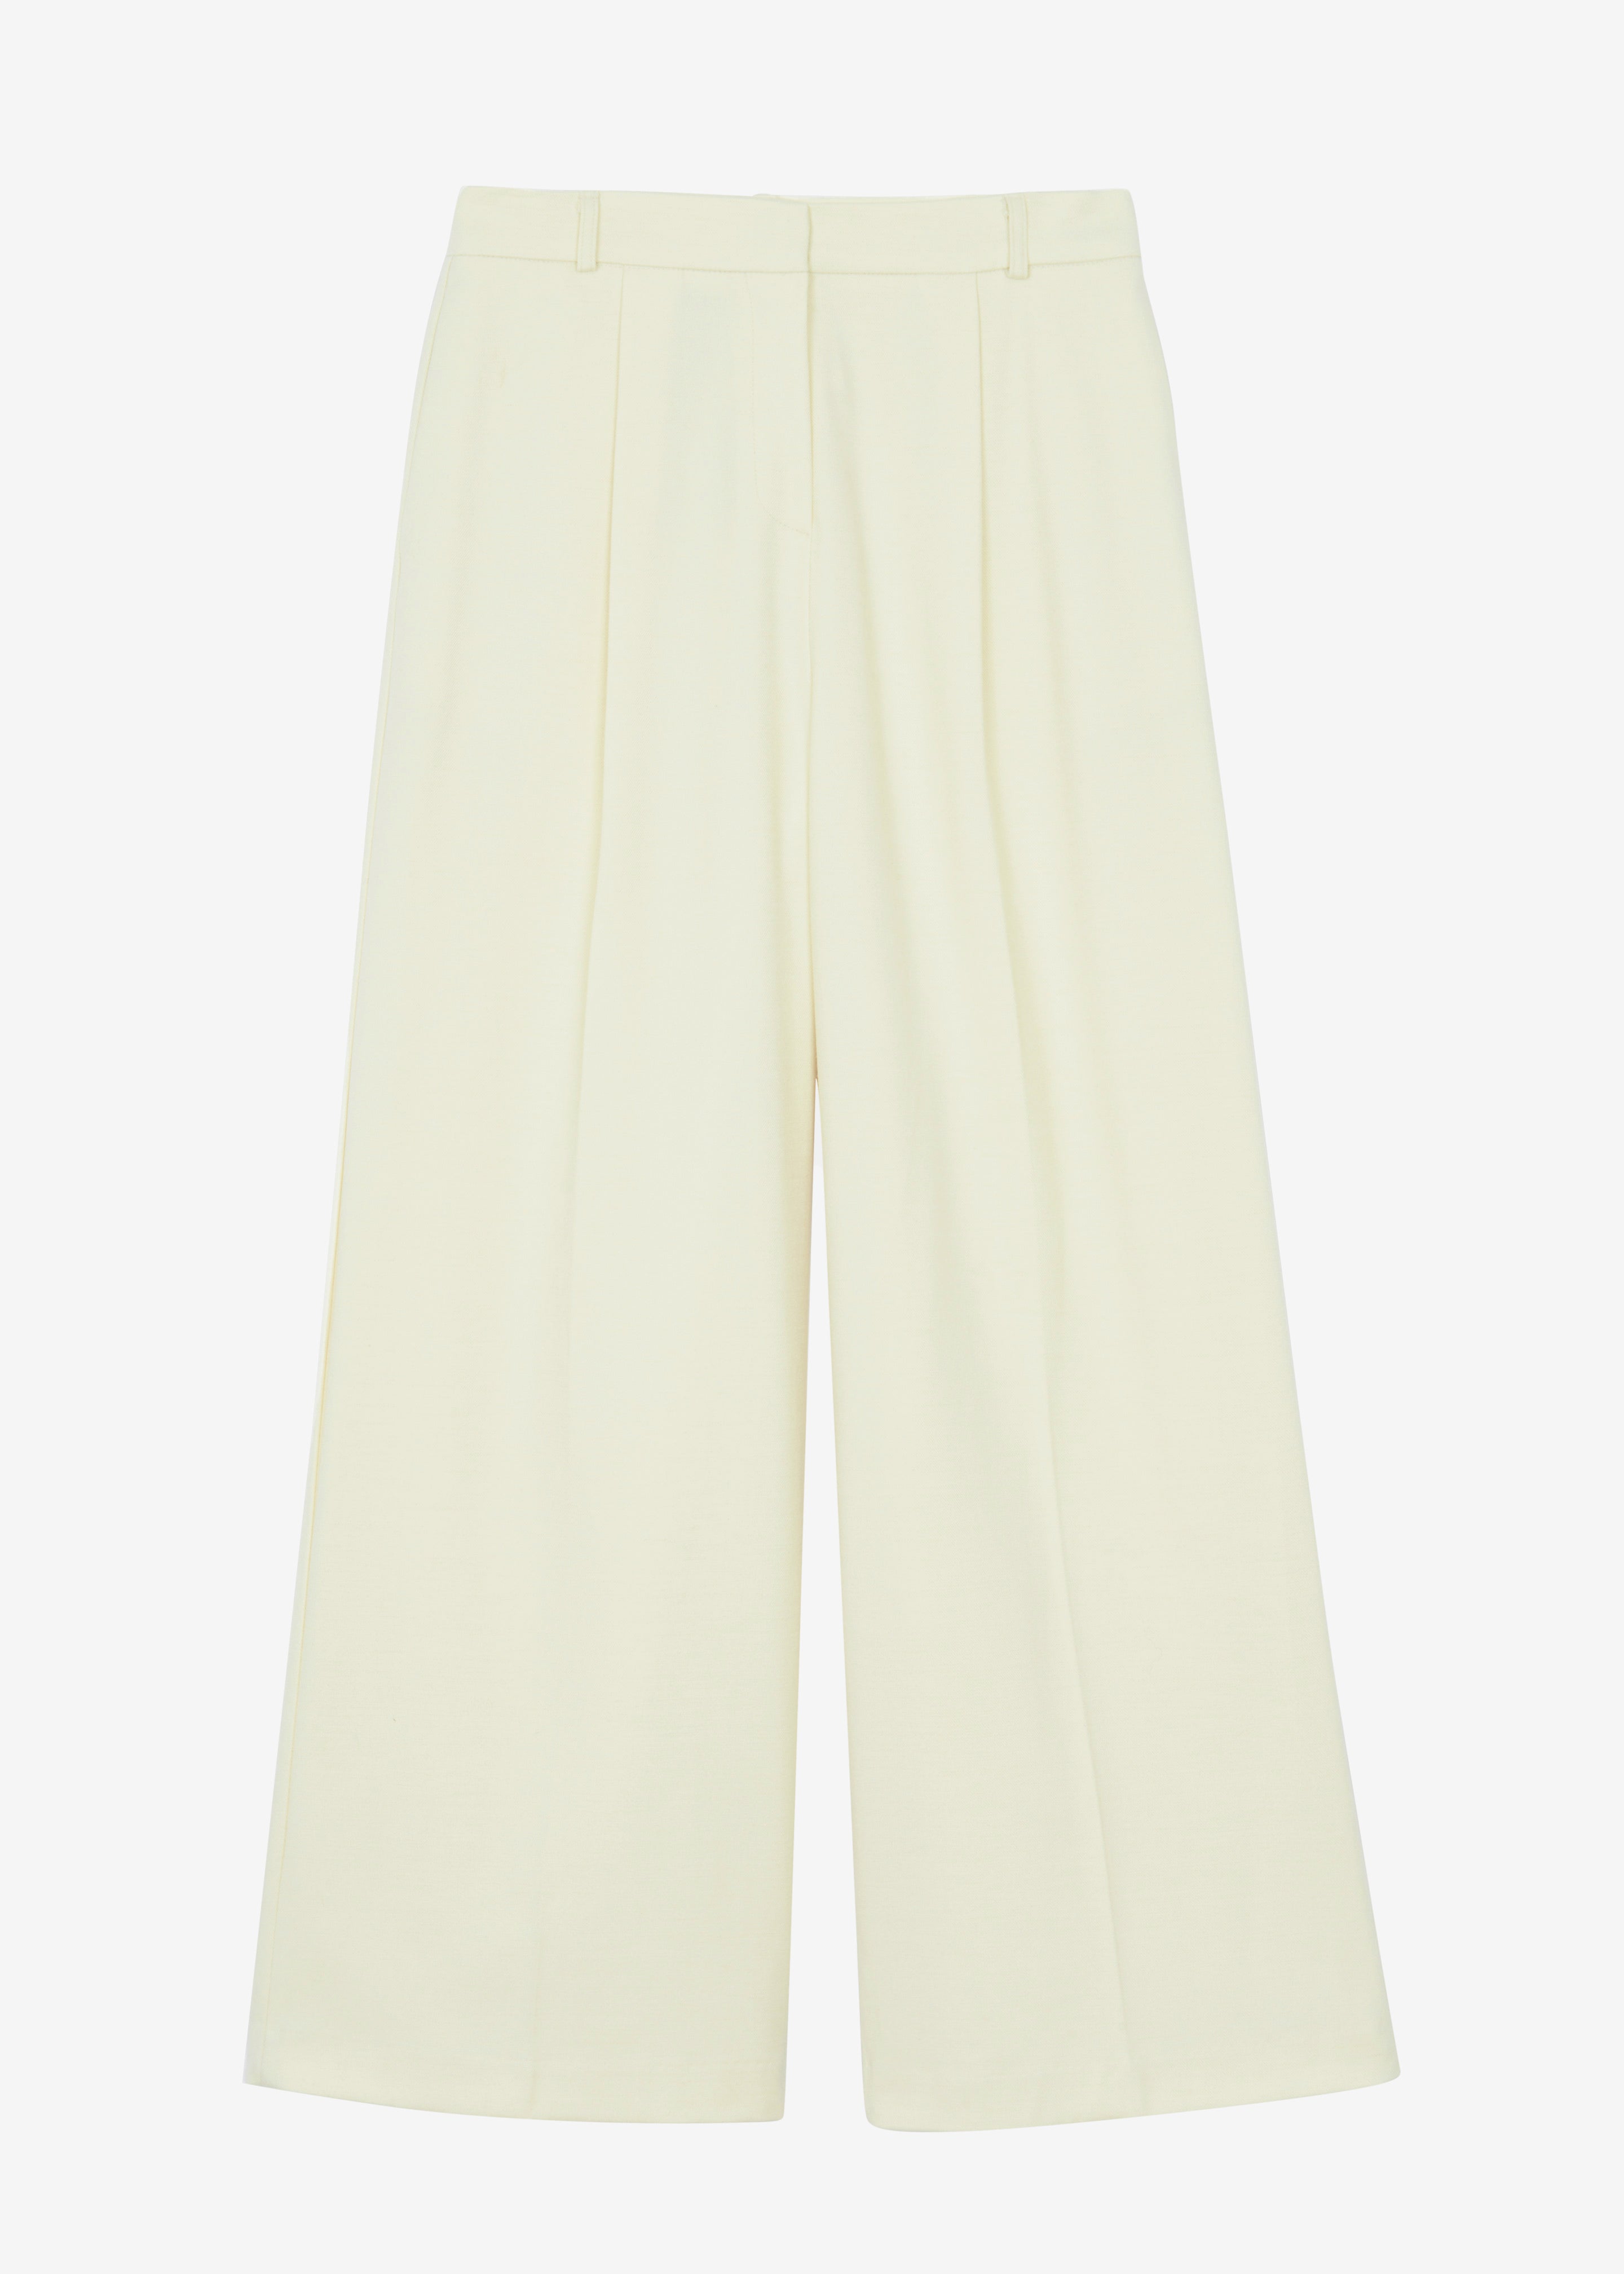 Long Tall Sally Cream Cotton Twill Wide Leg Cropped Trousers Size 12 ****  V97 | eBay